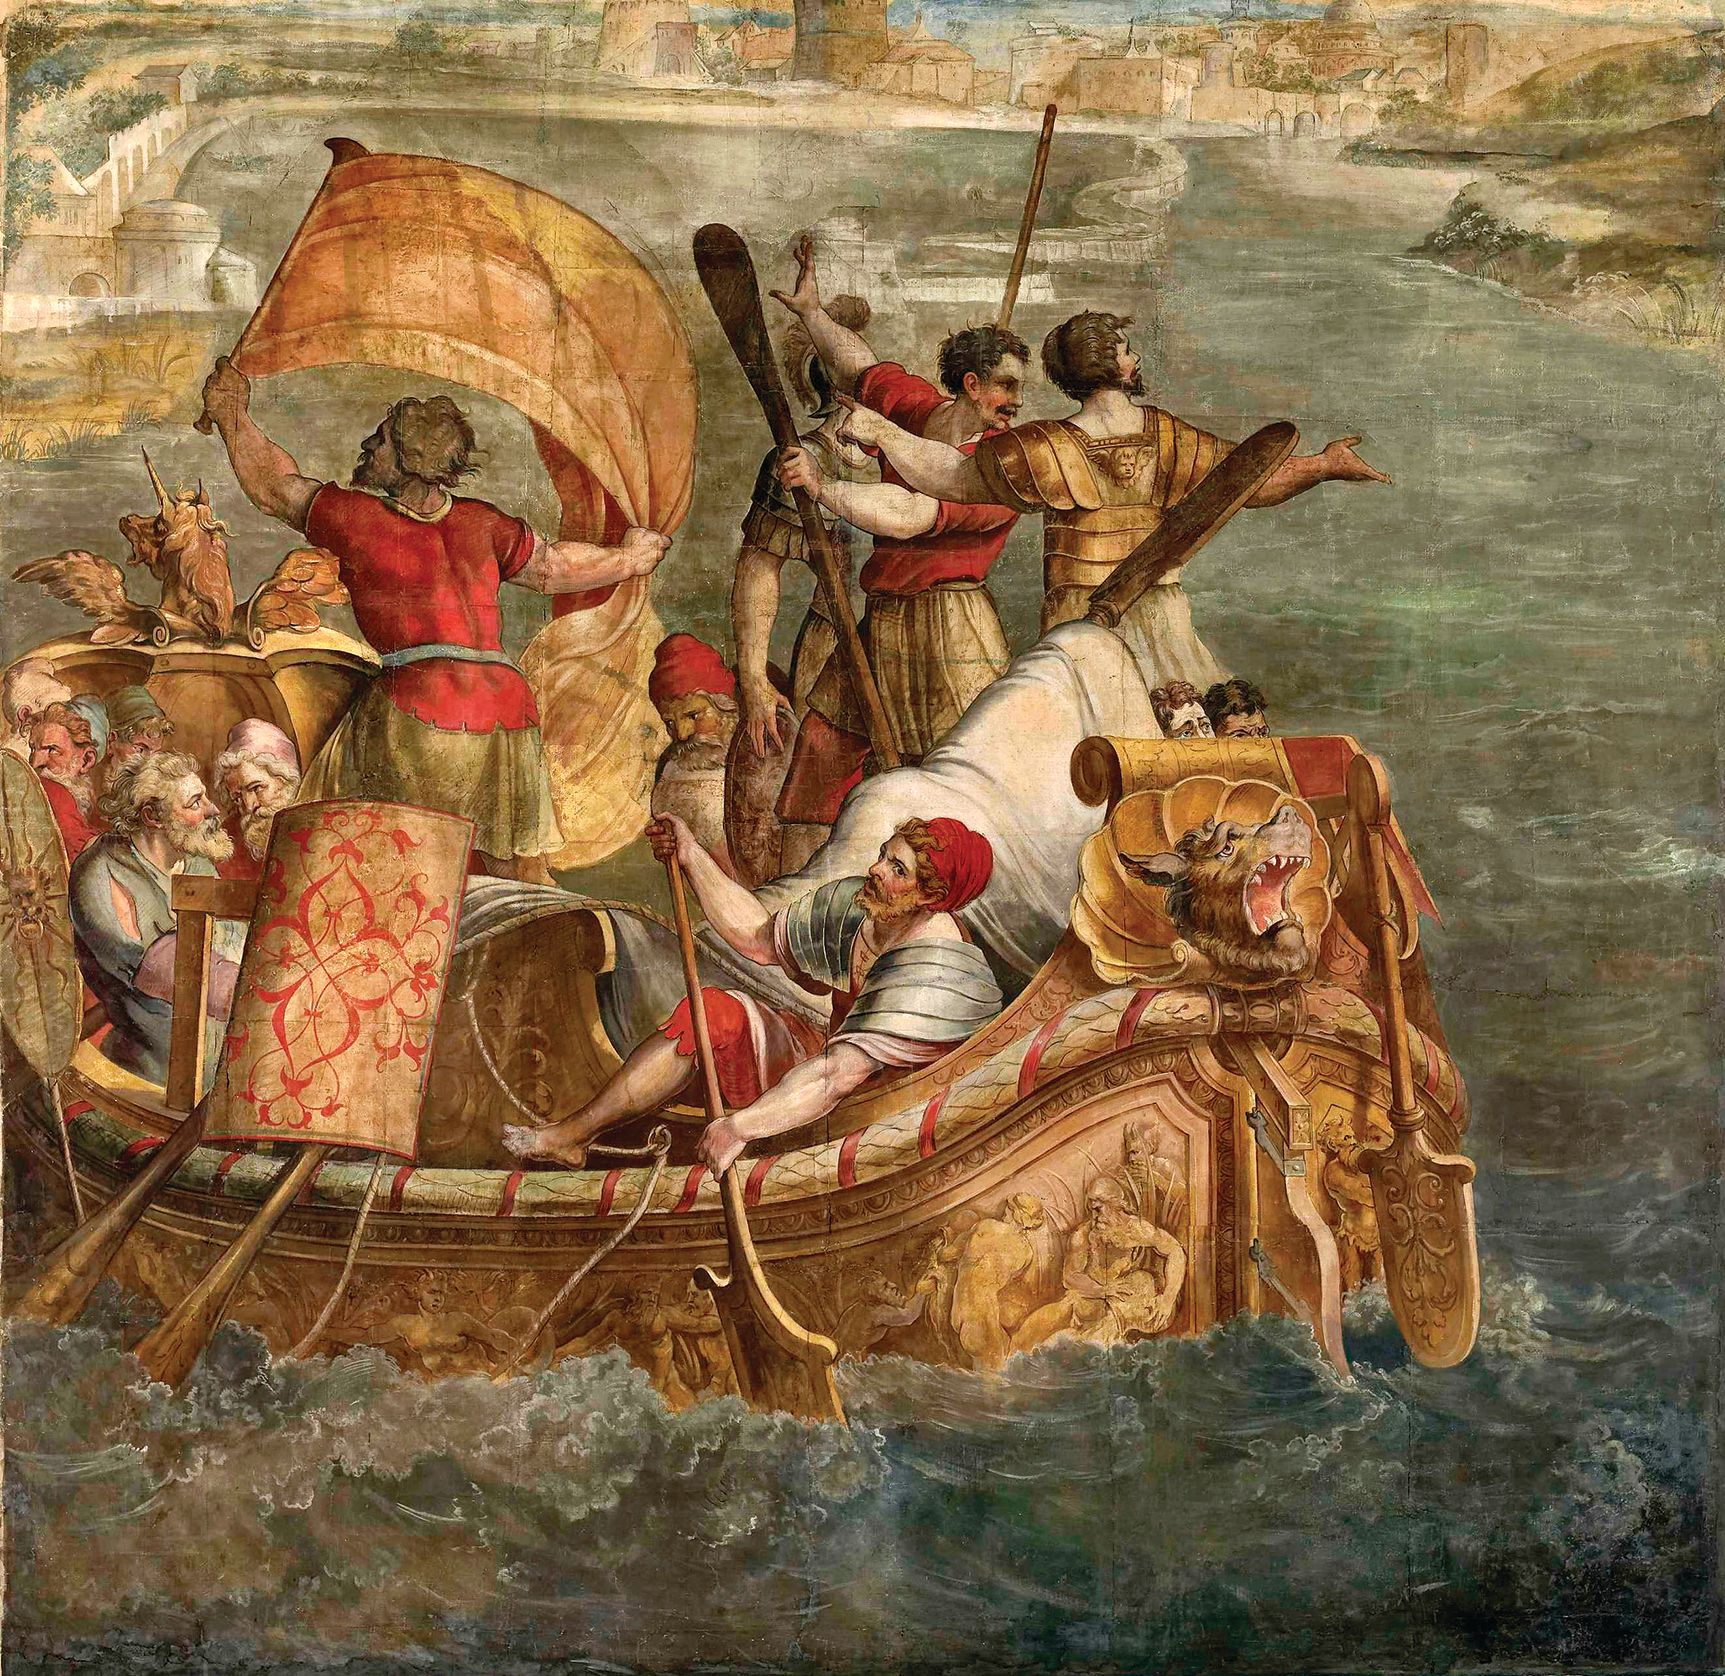 “Landing of Scipio Africanus at Carthage,” attributed to Michiel Coxcie (Belgium,1499-1592), shows the Roman general arriving in Africa. He would defeat Hannibal and the Carthaginians at the Battle of Zama in 202 BCE, effectively ending the Second Punic War. 